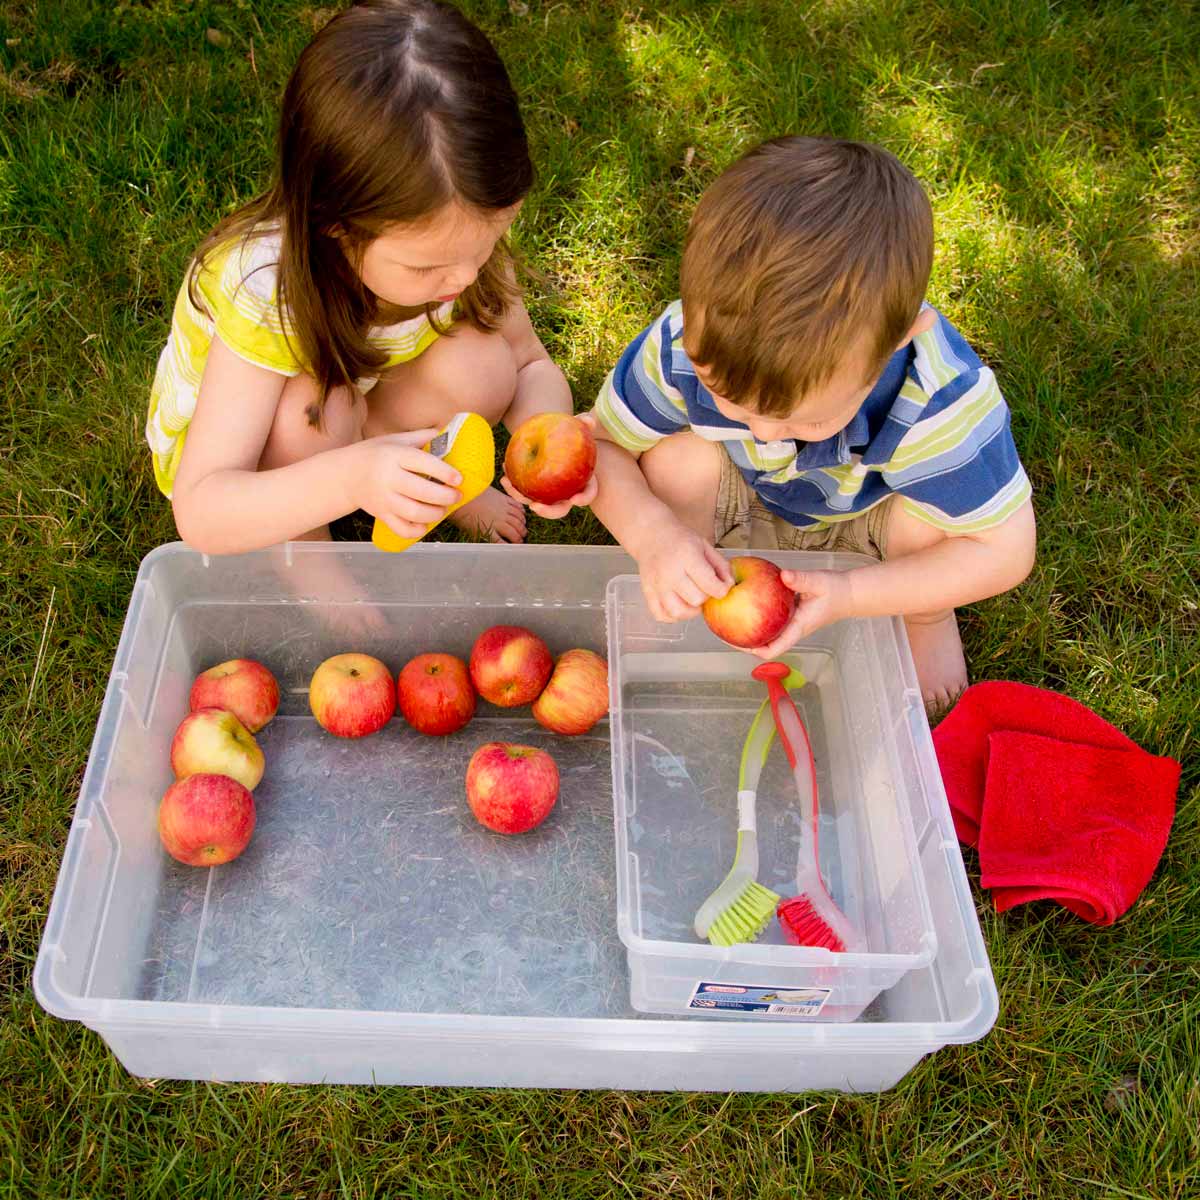 Two toddlers sit at a sensory bin holding apples. They are washing the apples with water, sponges, and soft brushes.